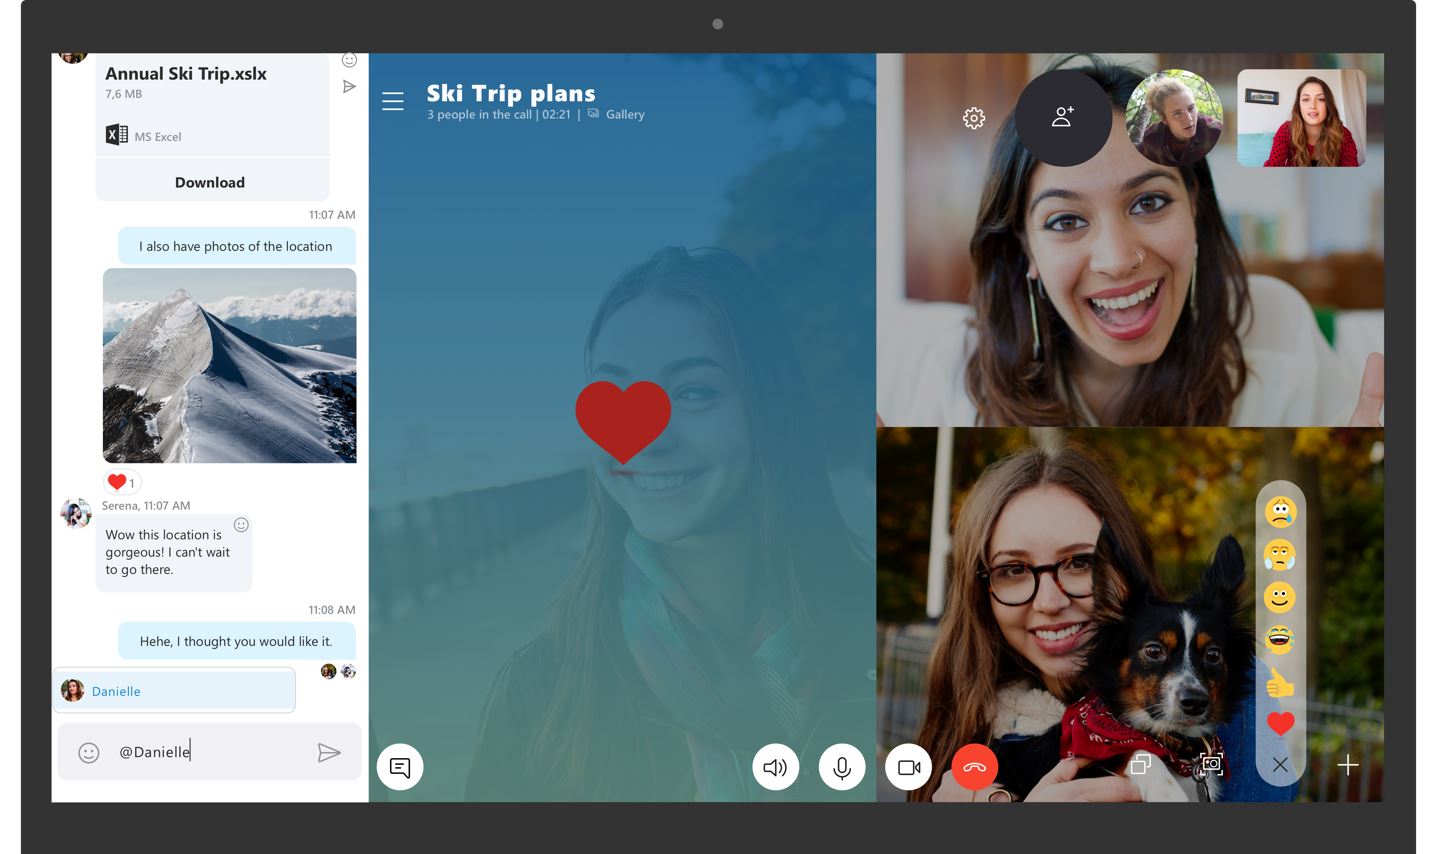 A closer look at new Skype experience for Windows 10 Skype-UWP-for-Windows-10.jpg